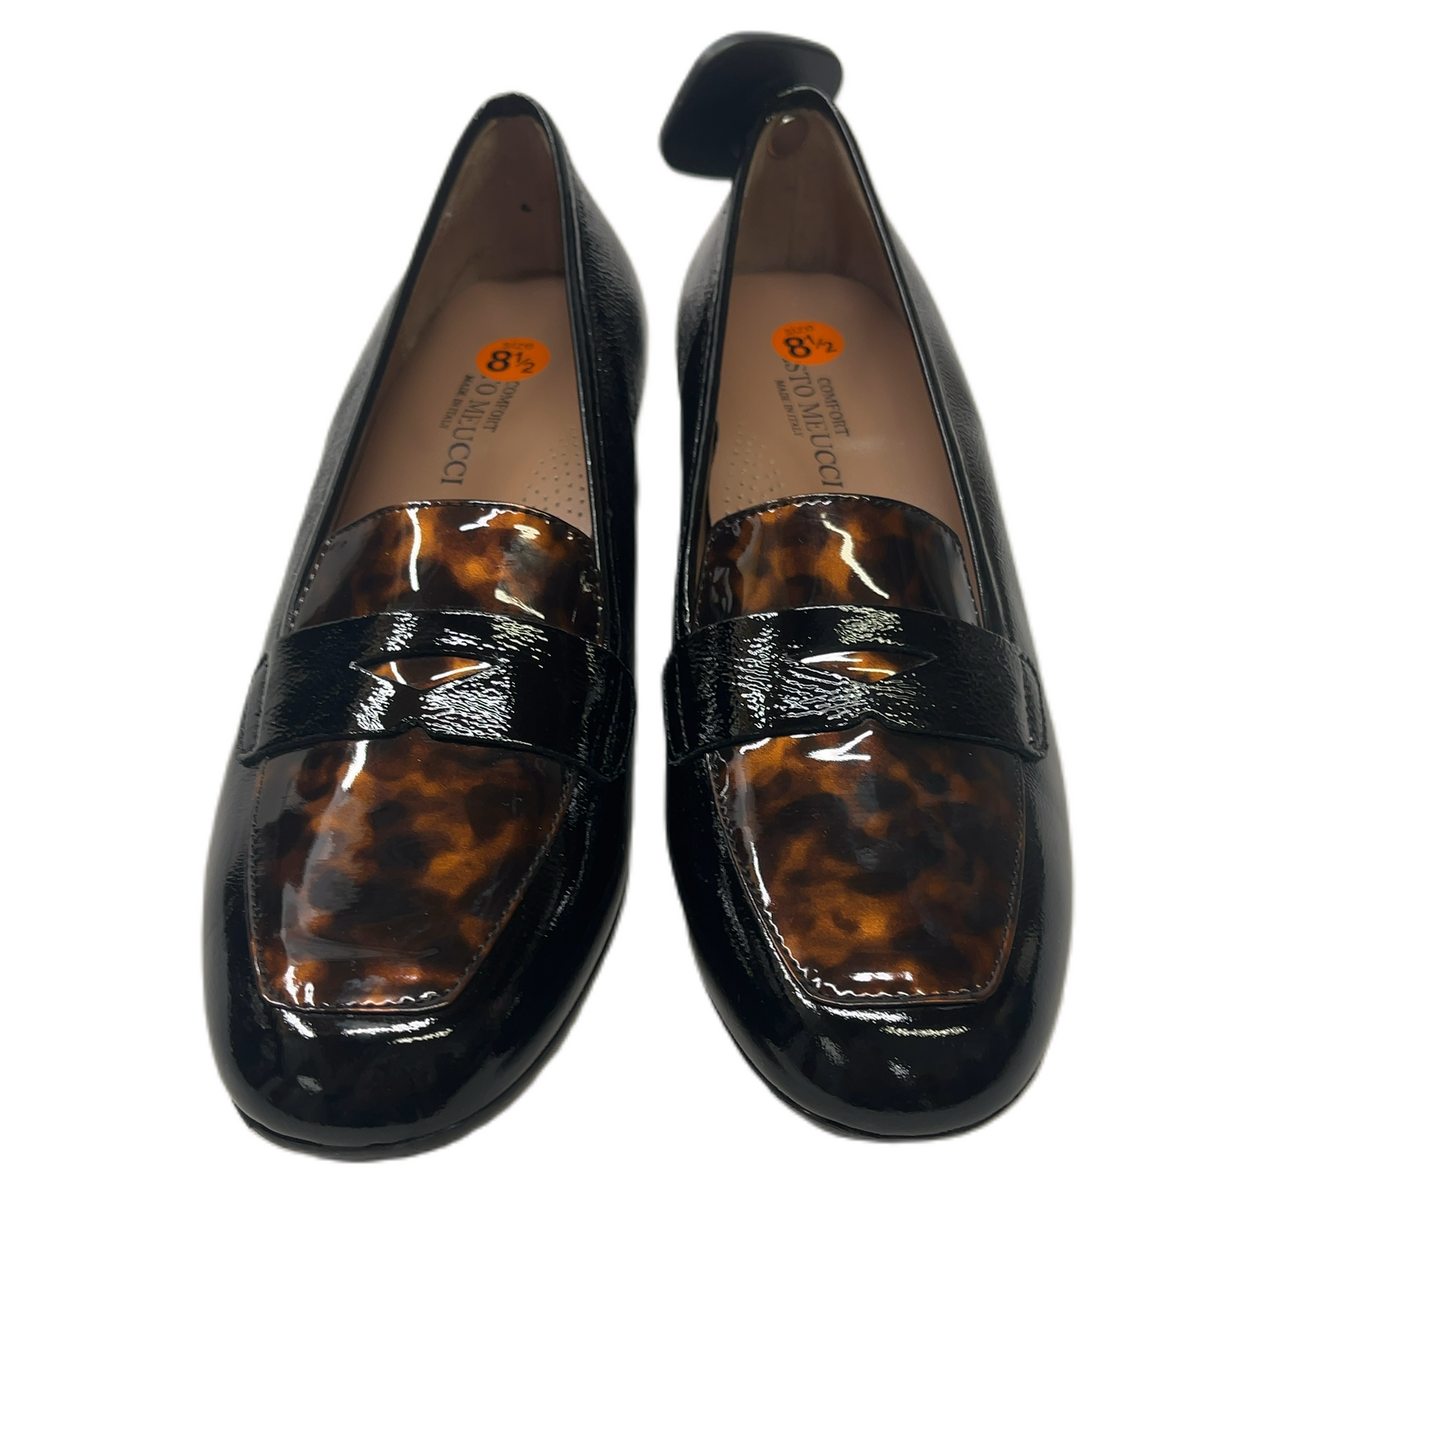 Shoes Heels Loafer Oxford By Sesto Meucci  Size: 8.5